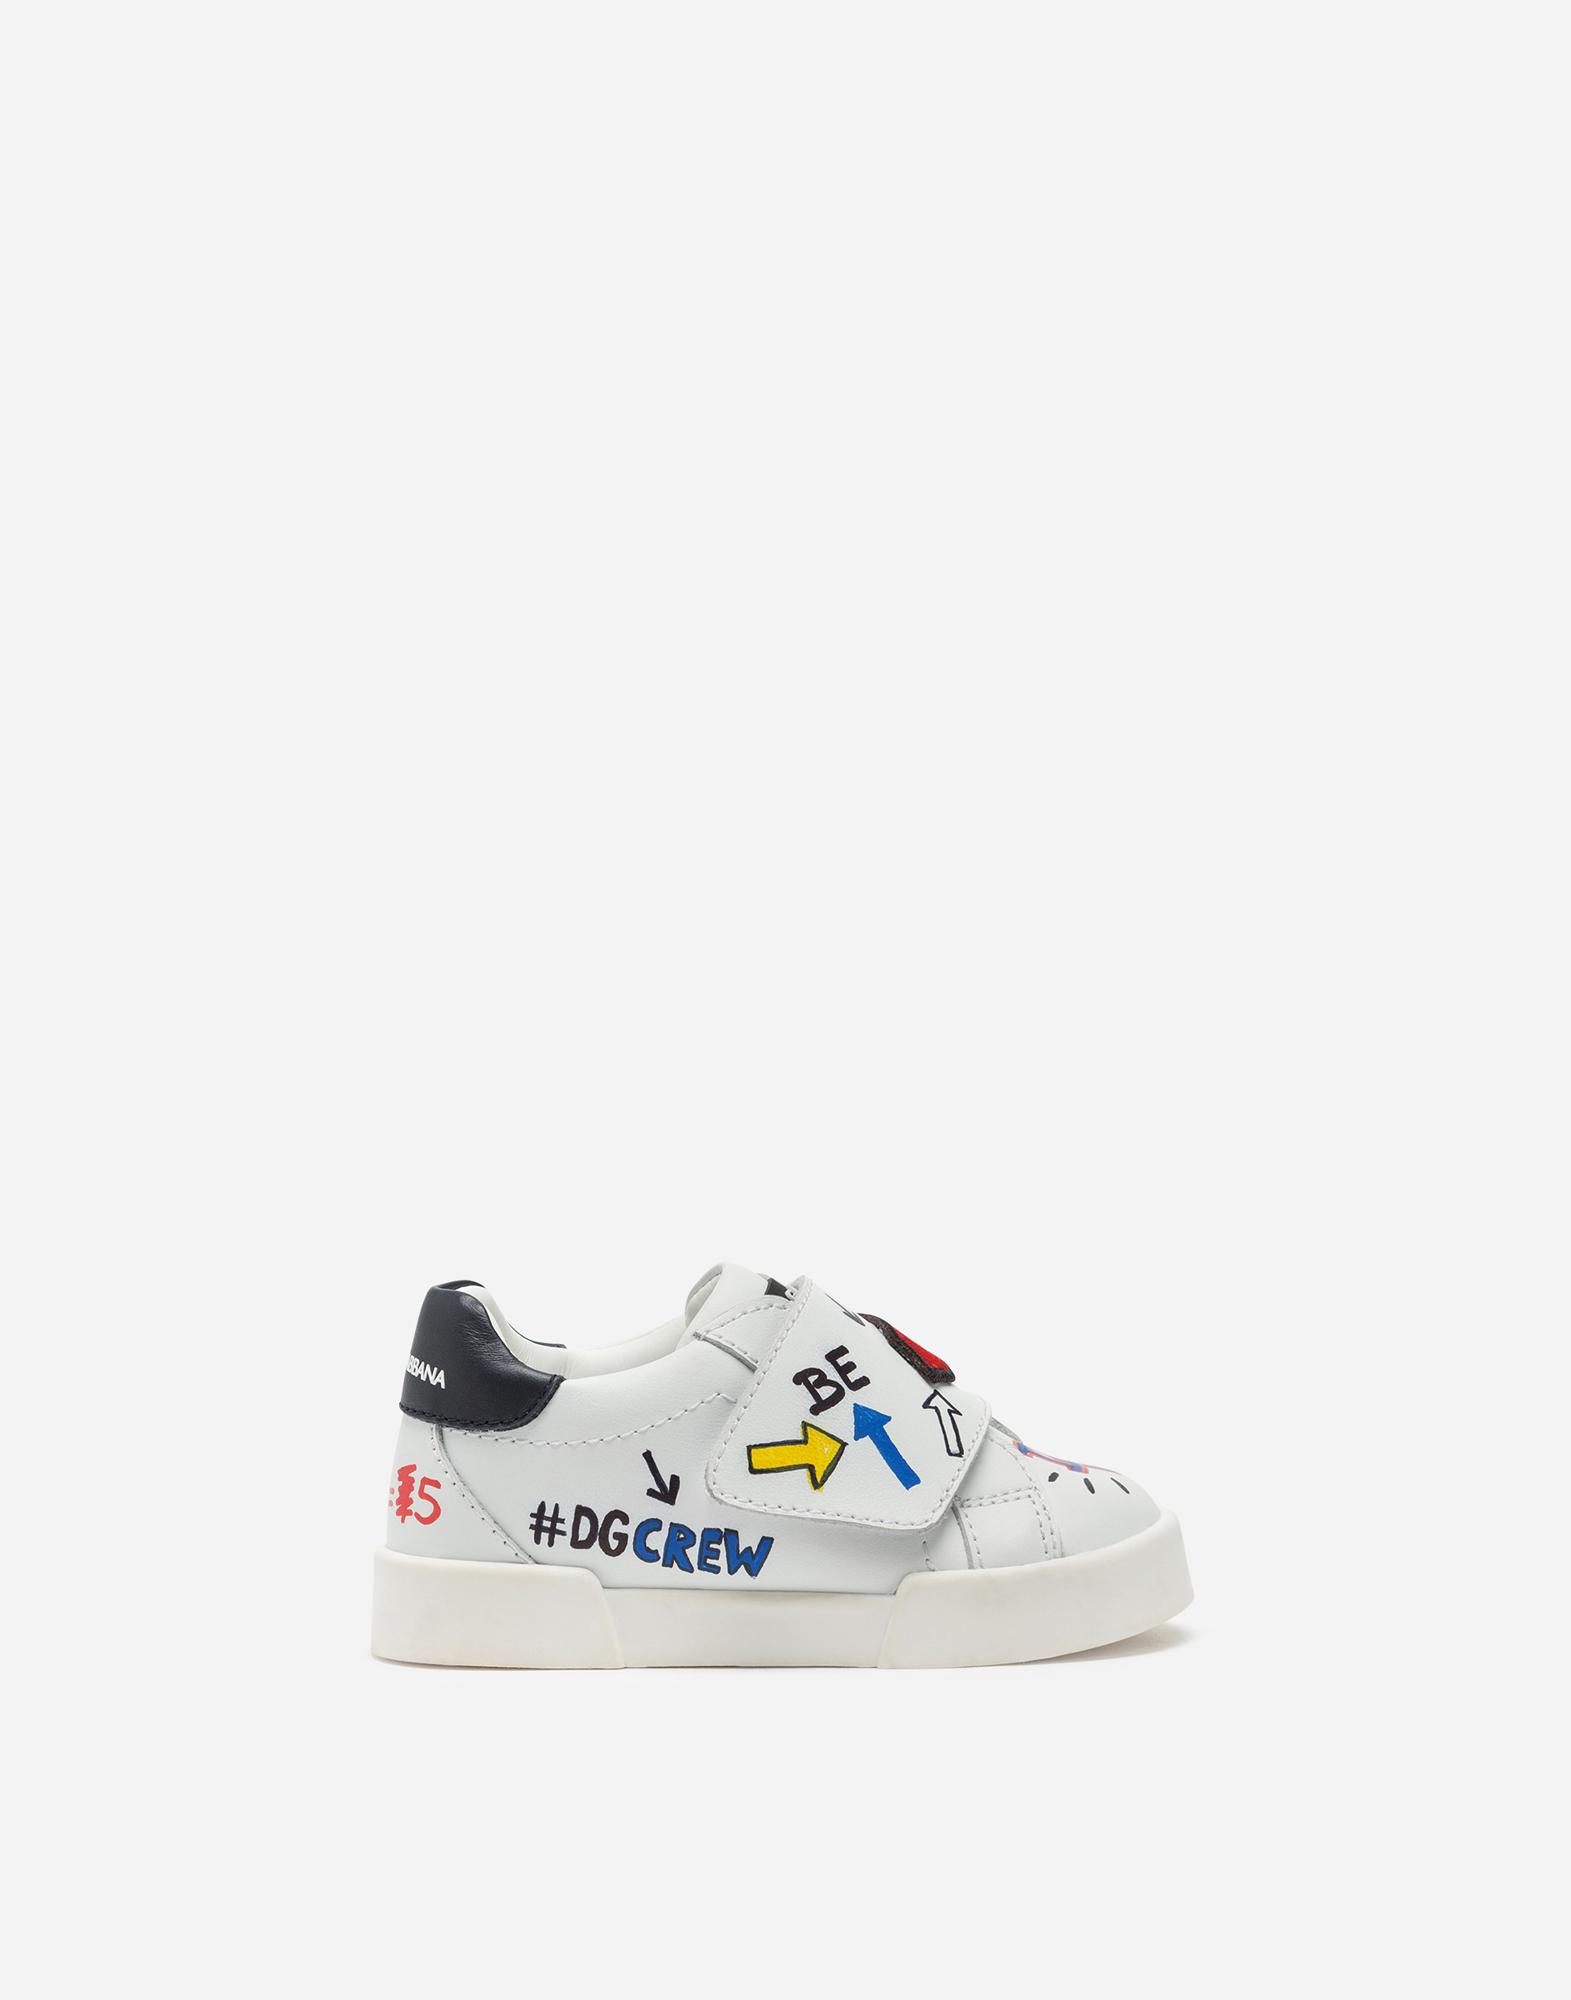 dolce and gabbana baby sneakers